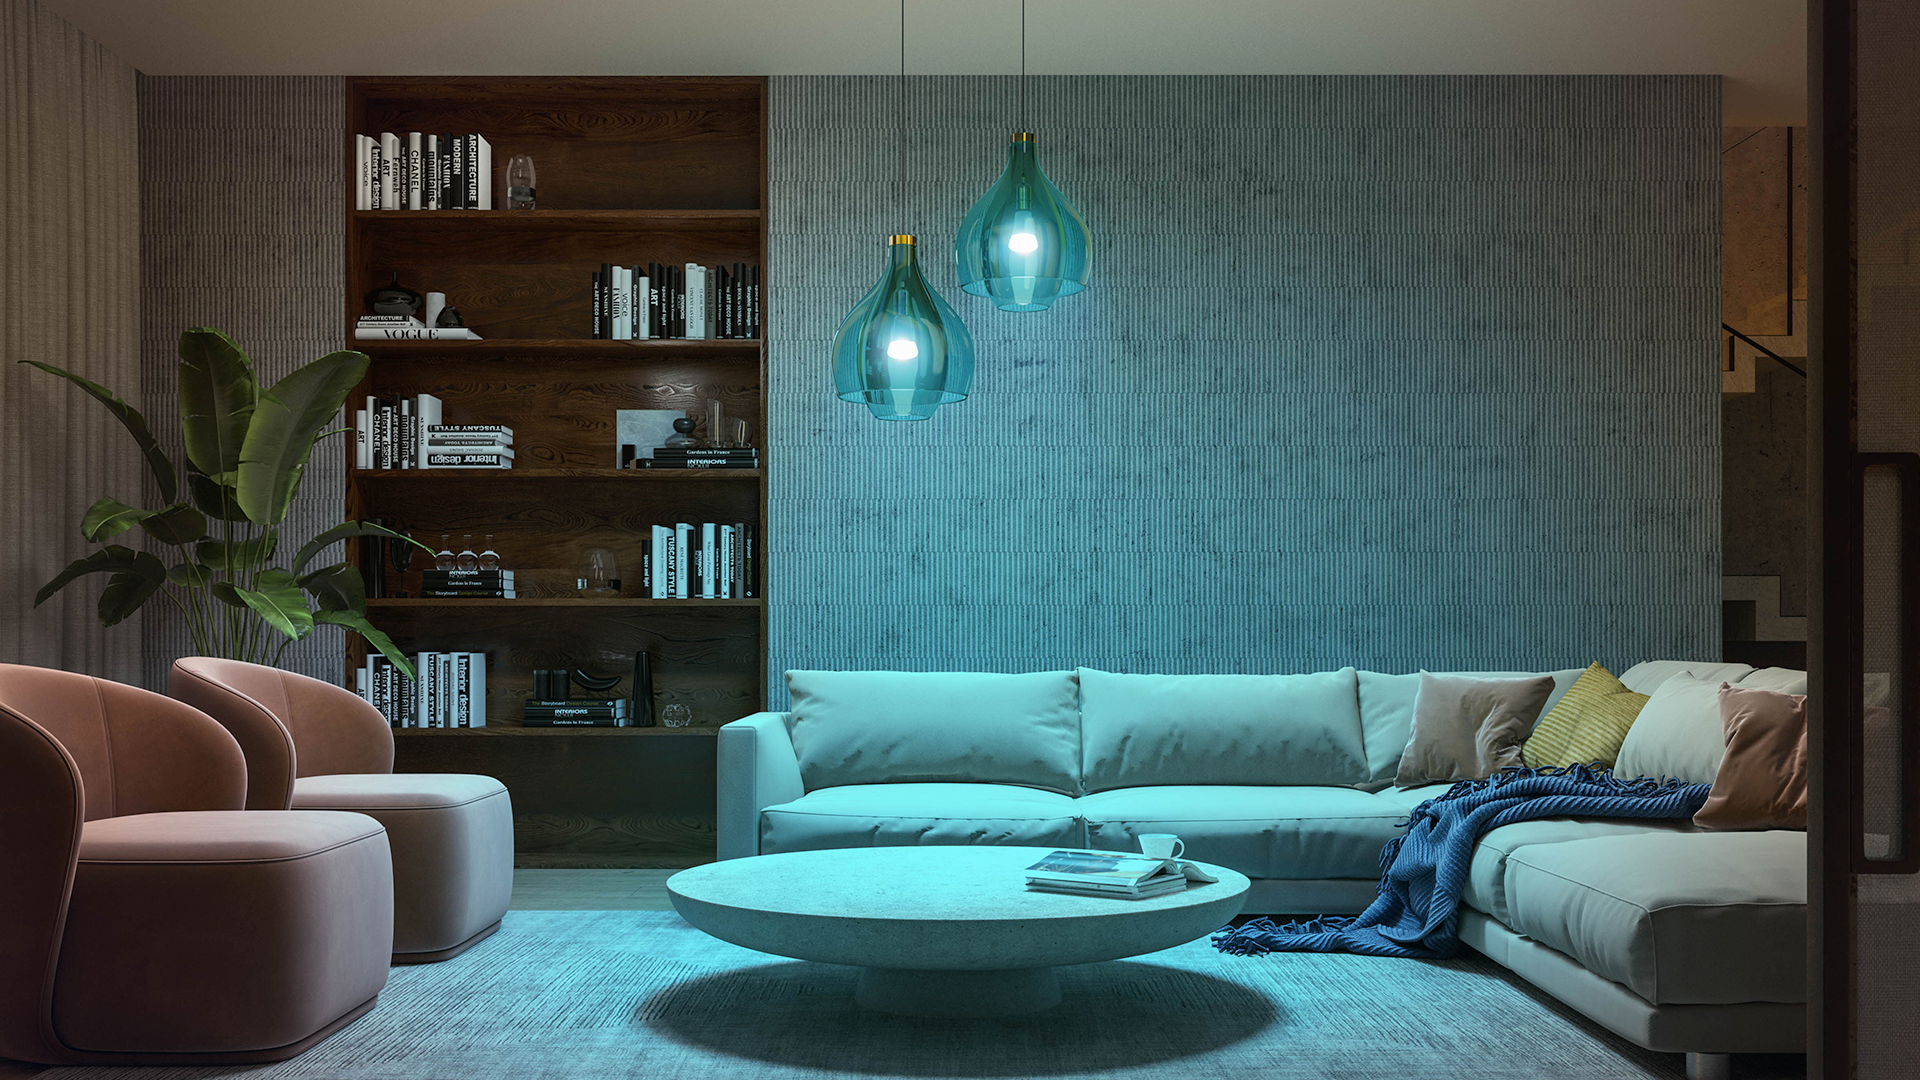 The new Philips Hue Color Ambient 1100 lumen bulbs.